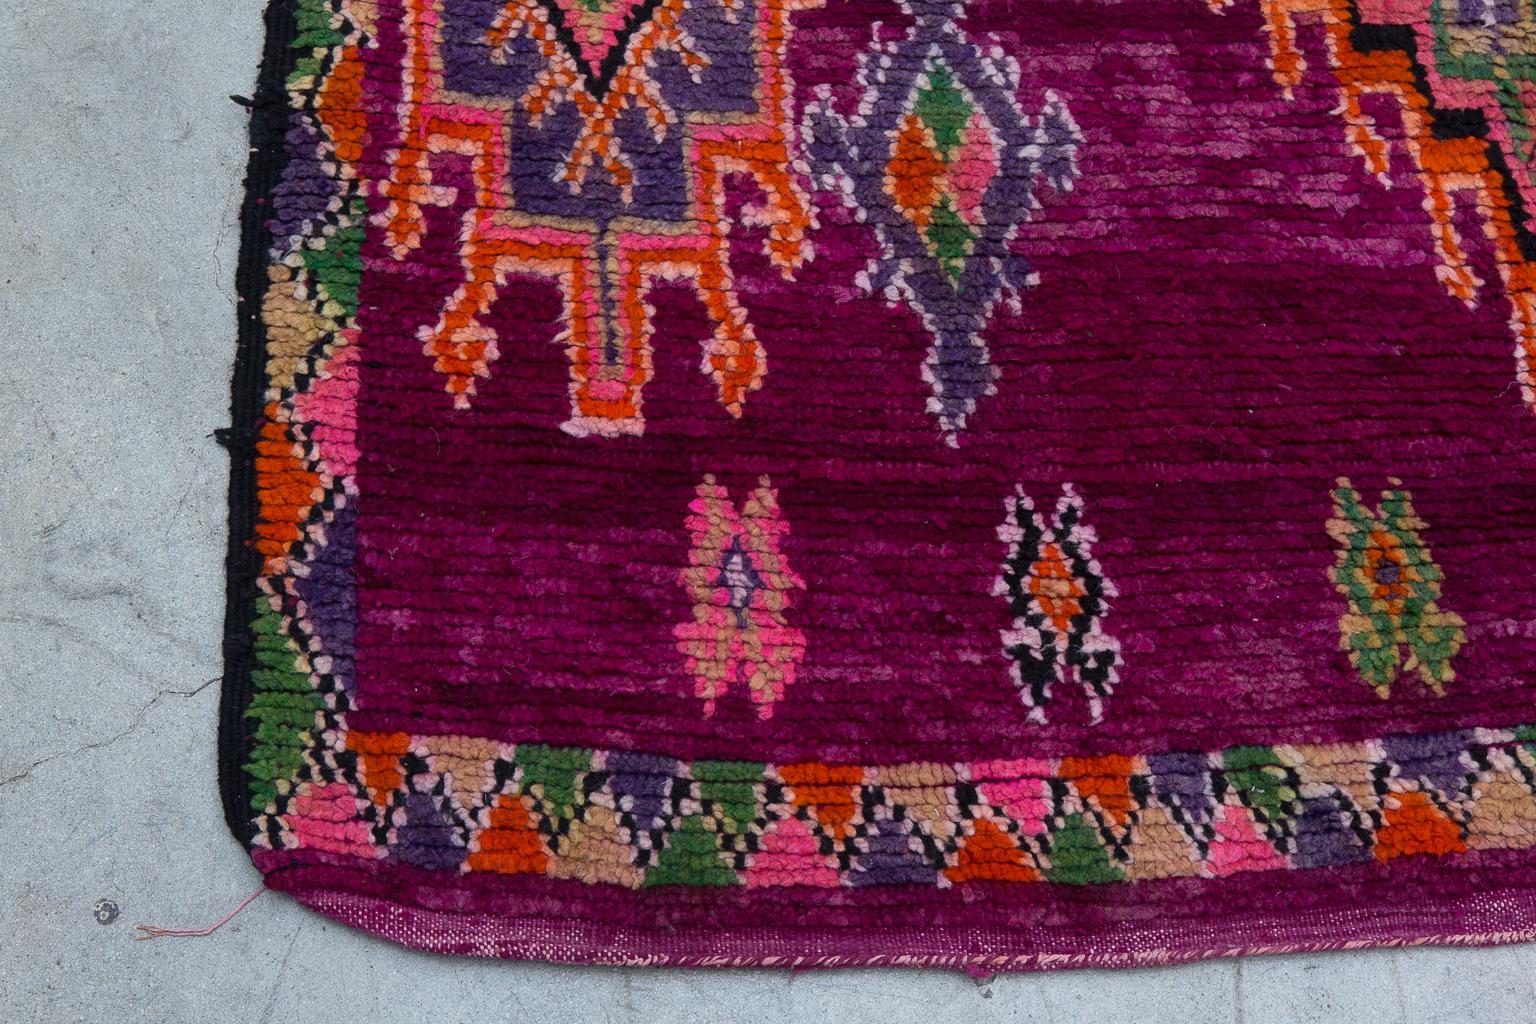 Vintage Moroccan Boujad Rug - Magenta, Purple, Pink In Good Condition For Sale In Palm Springs, CA